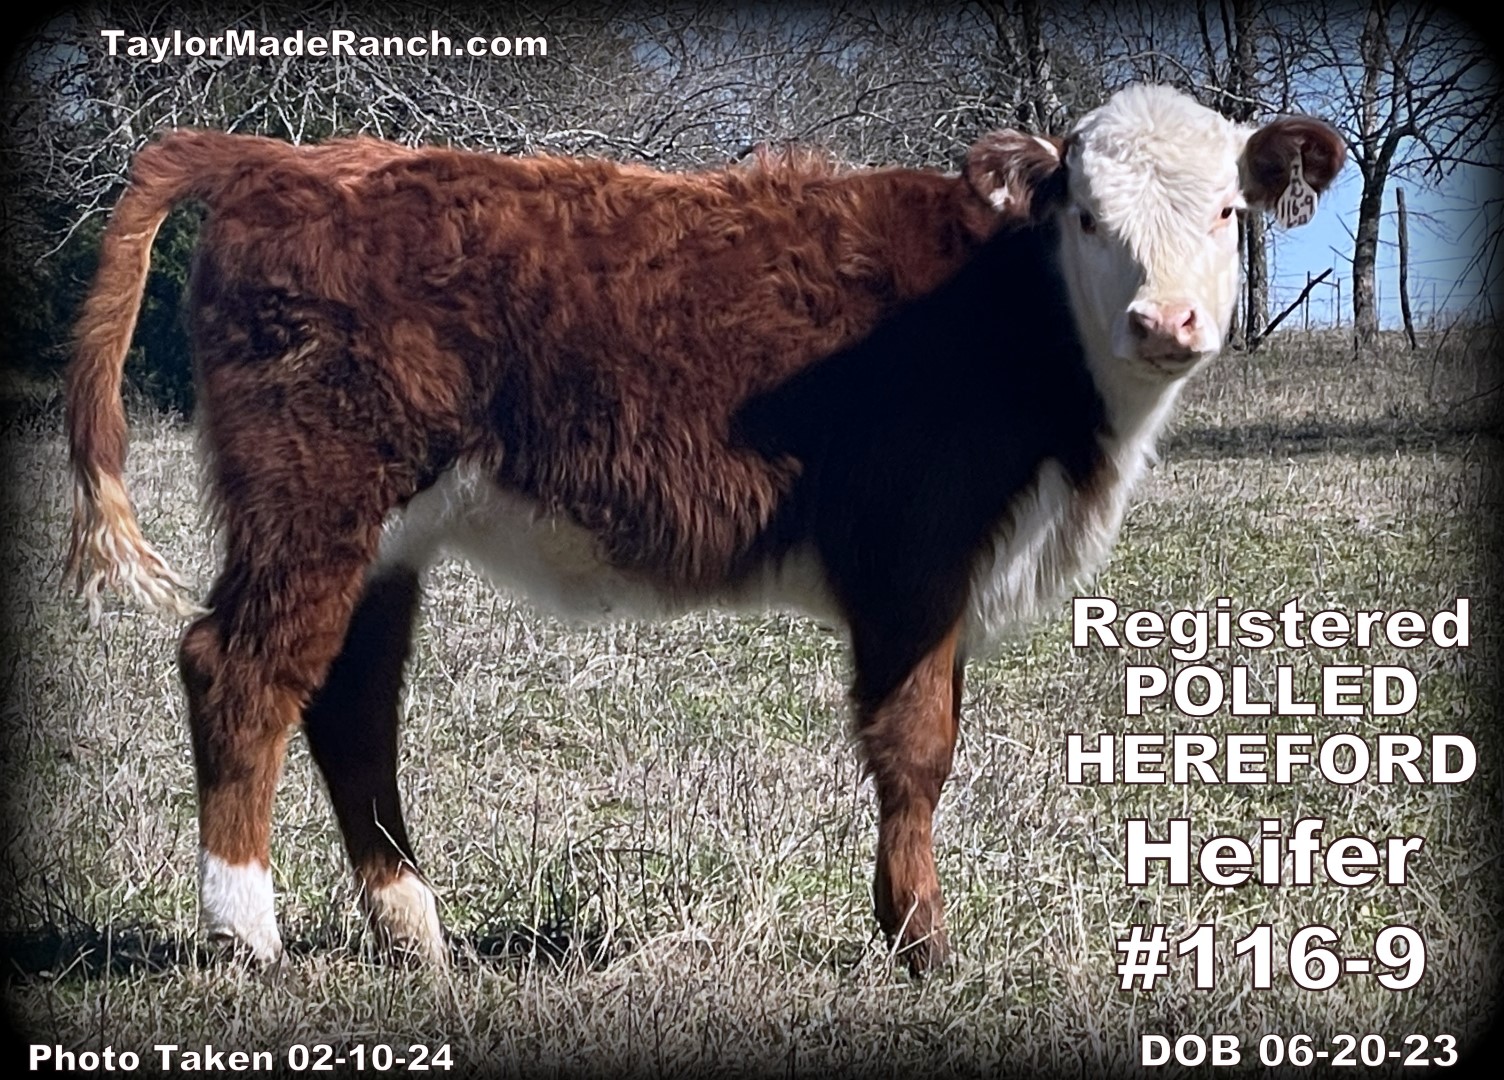 Registered Polled Hereford calves for sale in Northeast Texas #TaylorMadeRanch